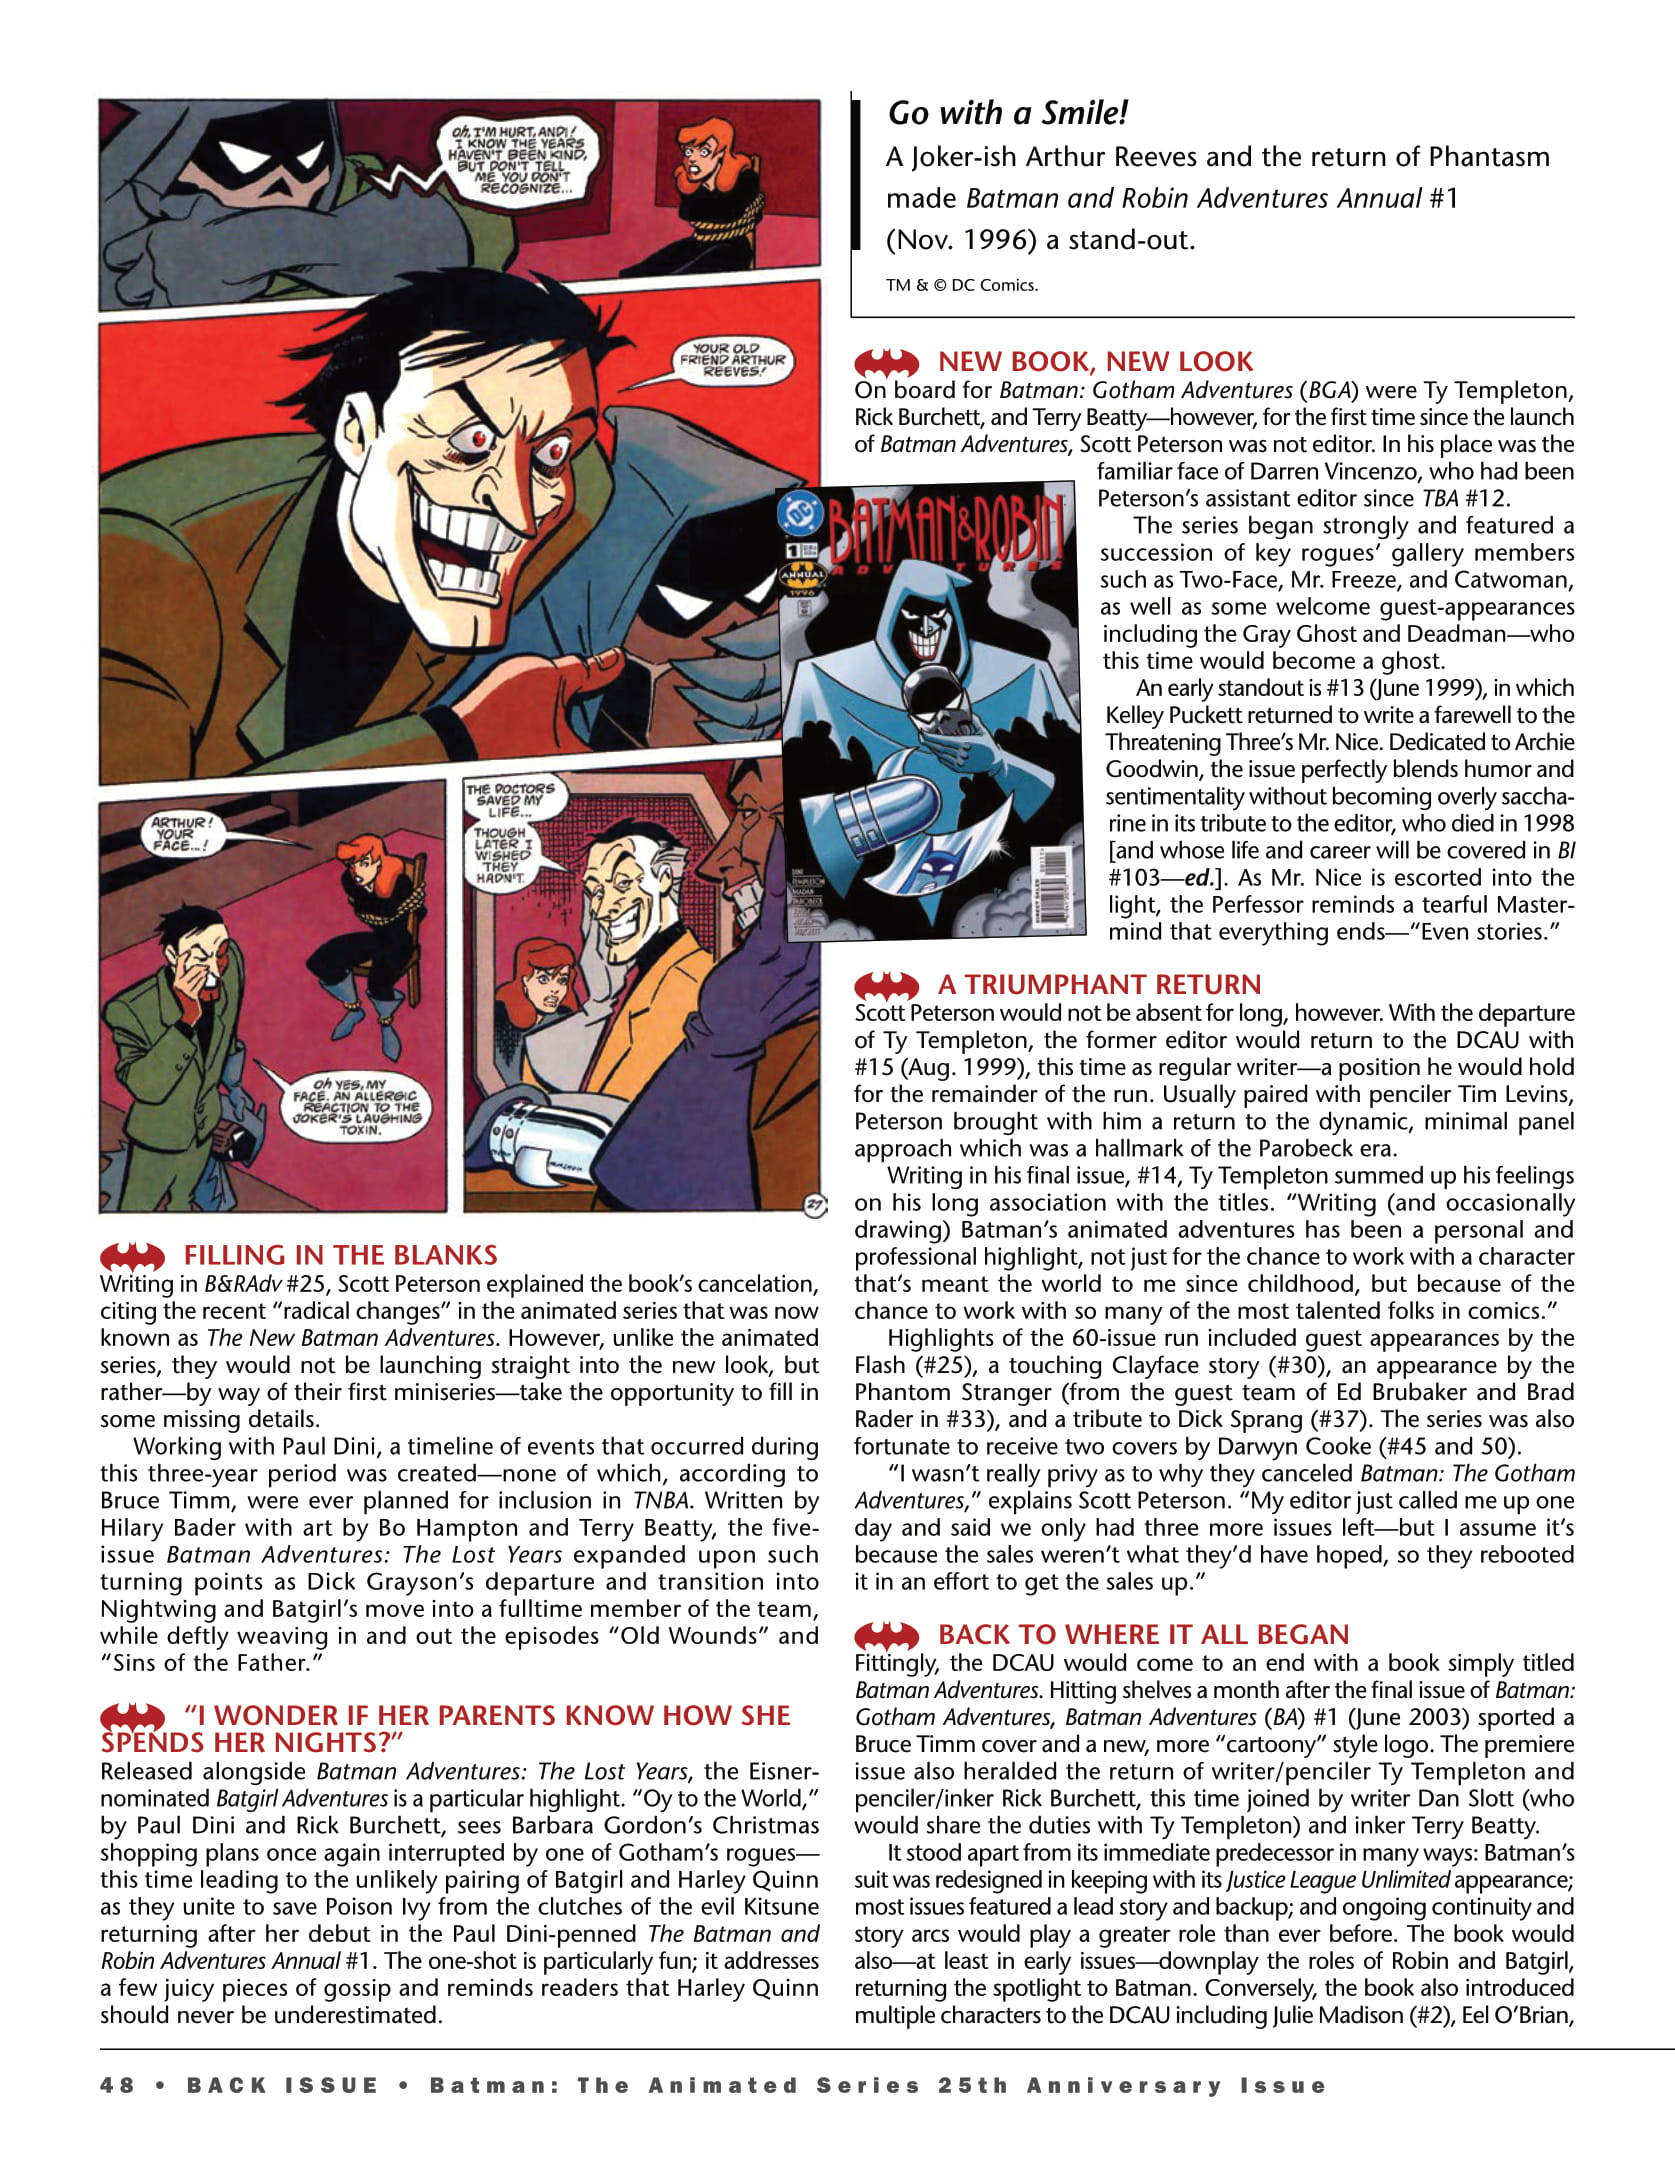 Read online Back Issue comic -  Issue #99 - 50